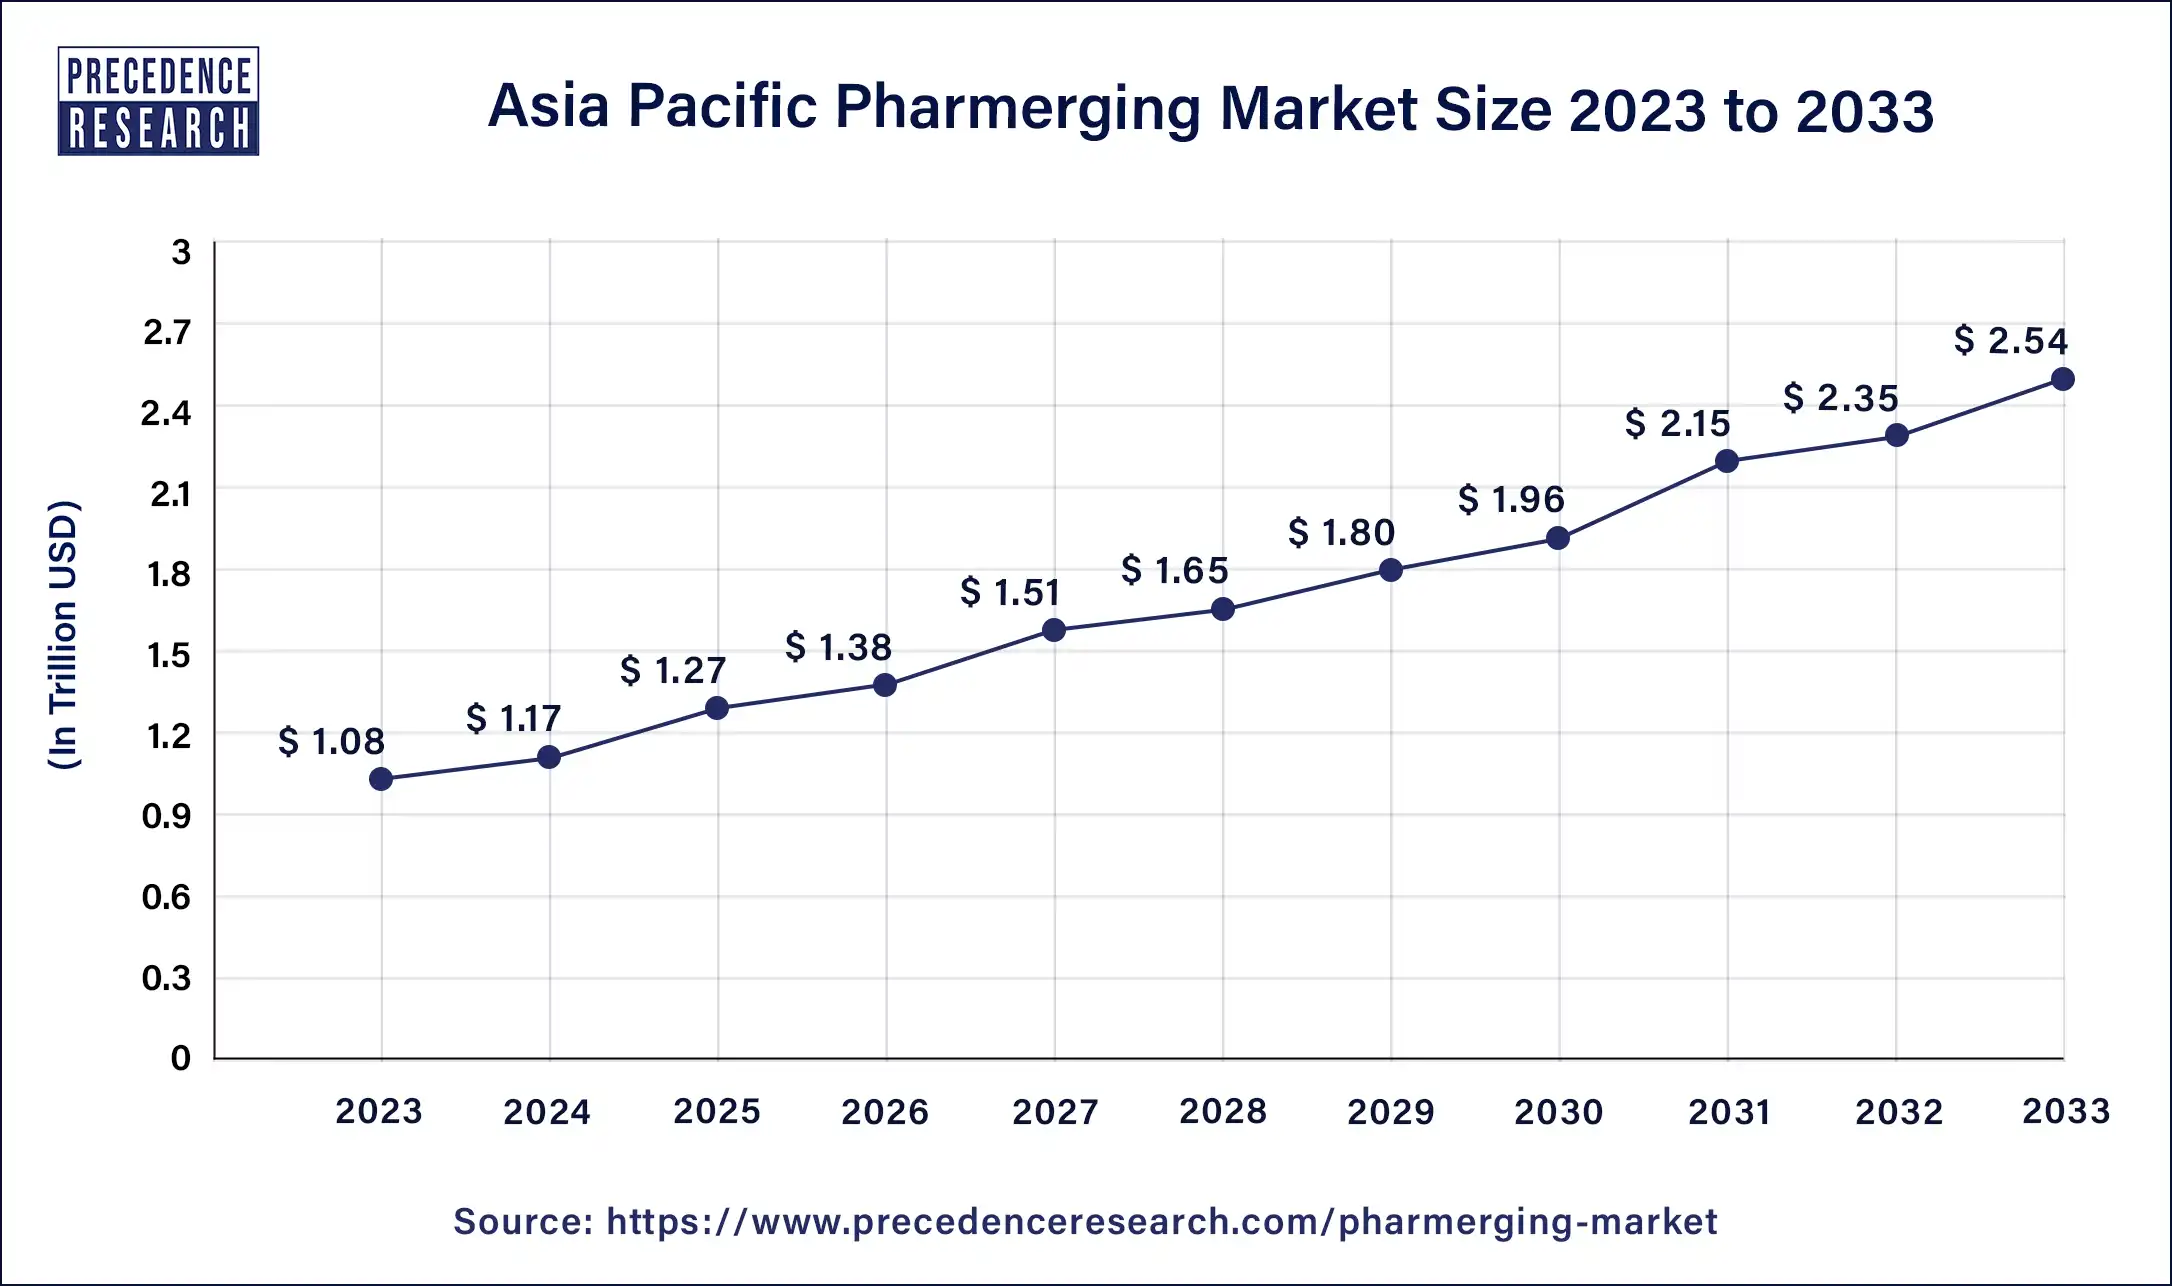 Asia Pacific Pharmerging Market Size 2024 to 2033